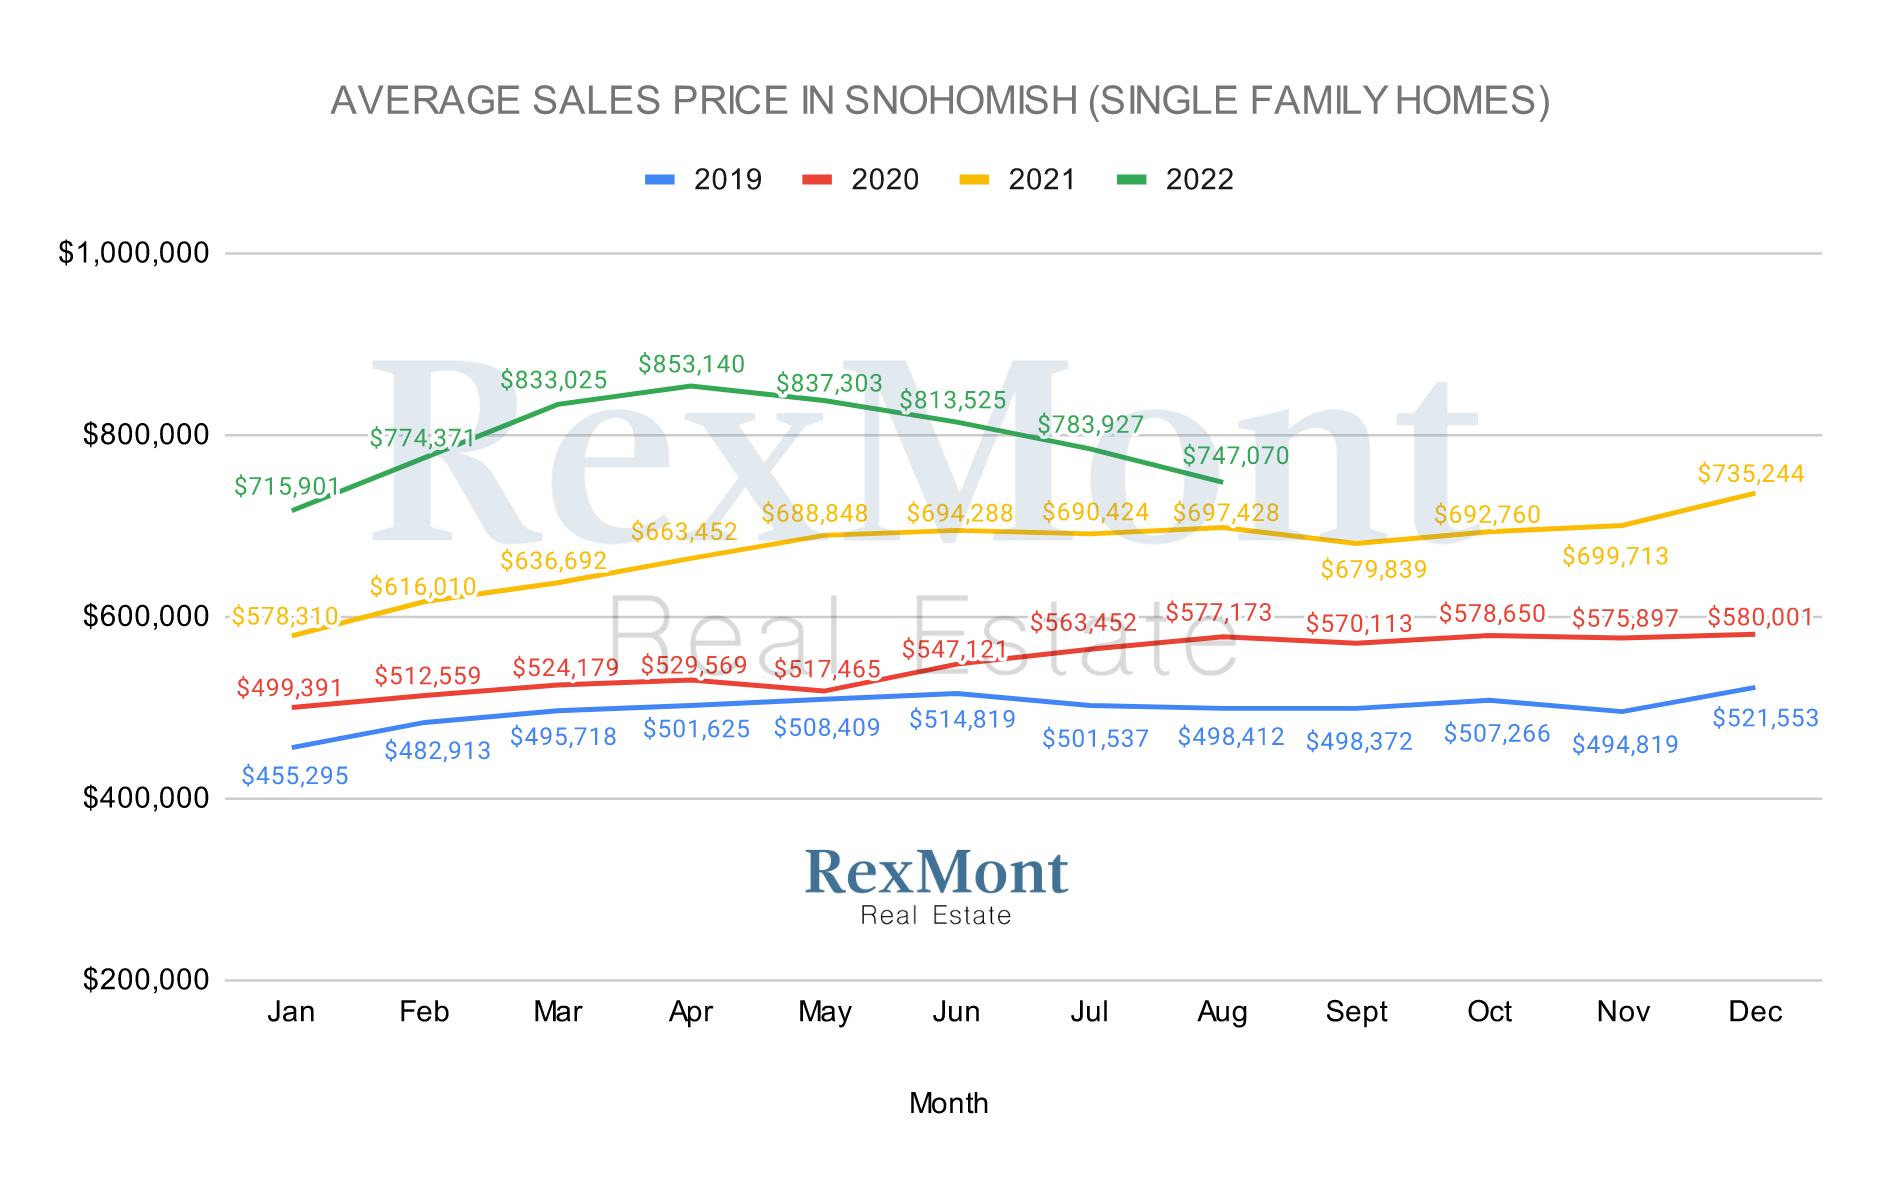 Graph of Average Sales Price of Real Estate Monthly in Snohomish County